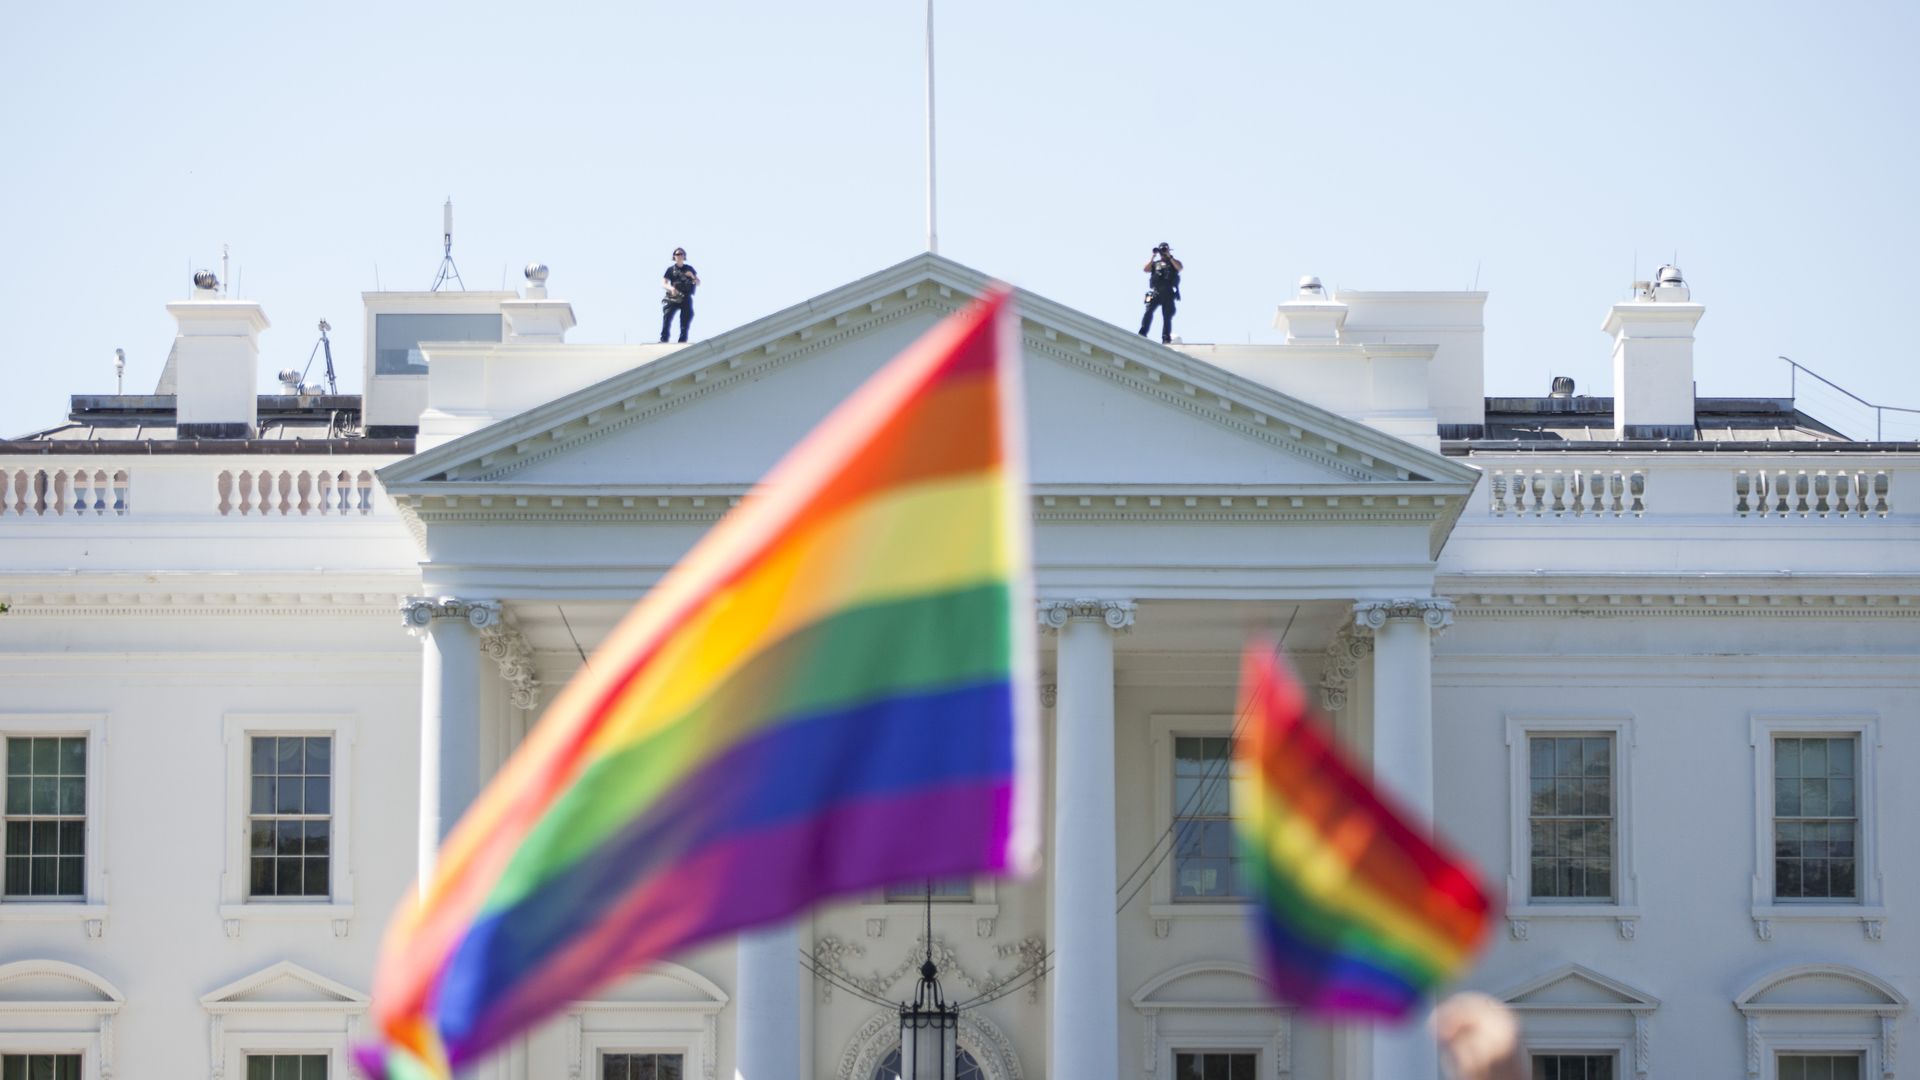 Rainbow flags in the foreground of a shot of the White House' south lawn